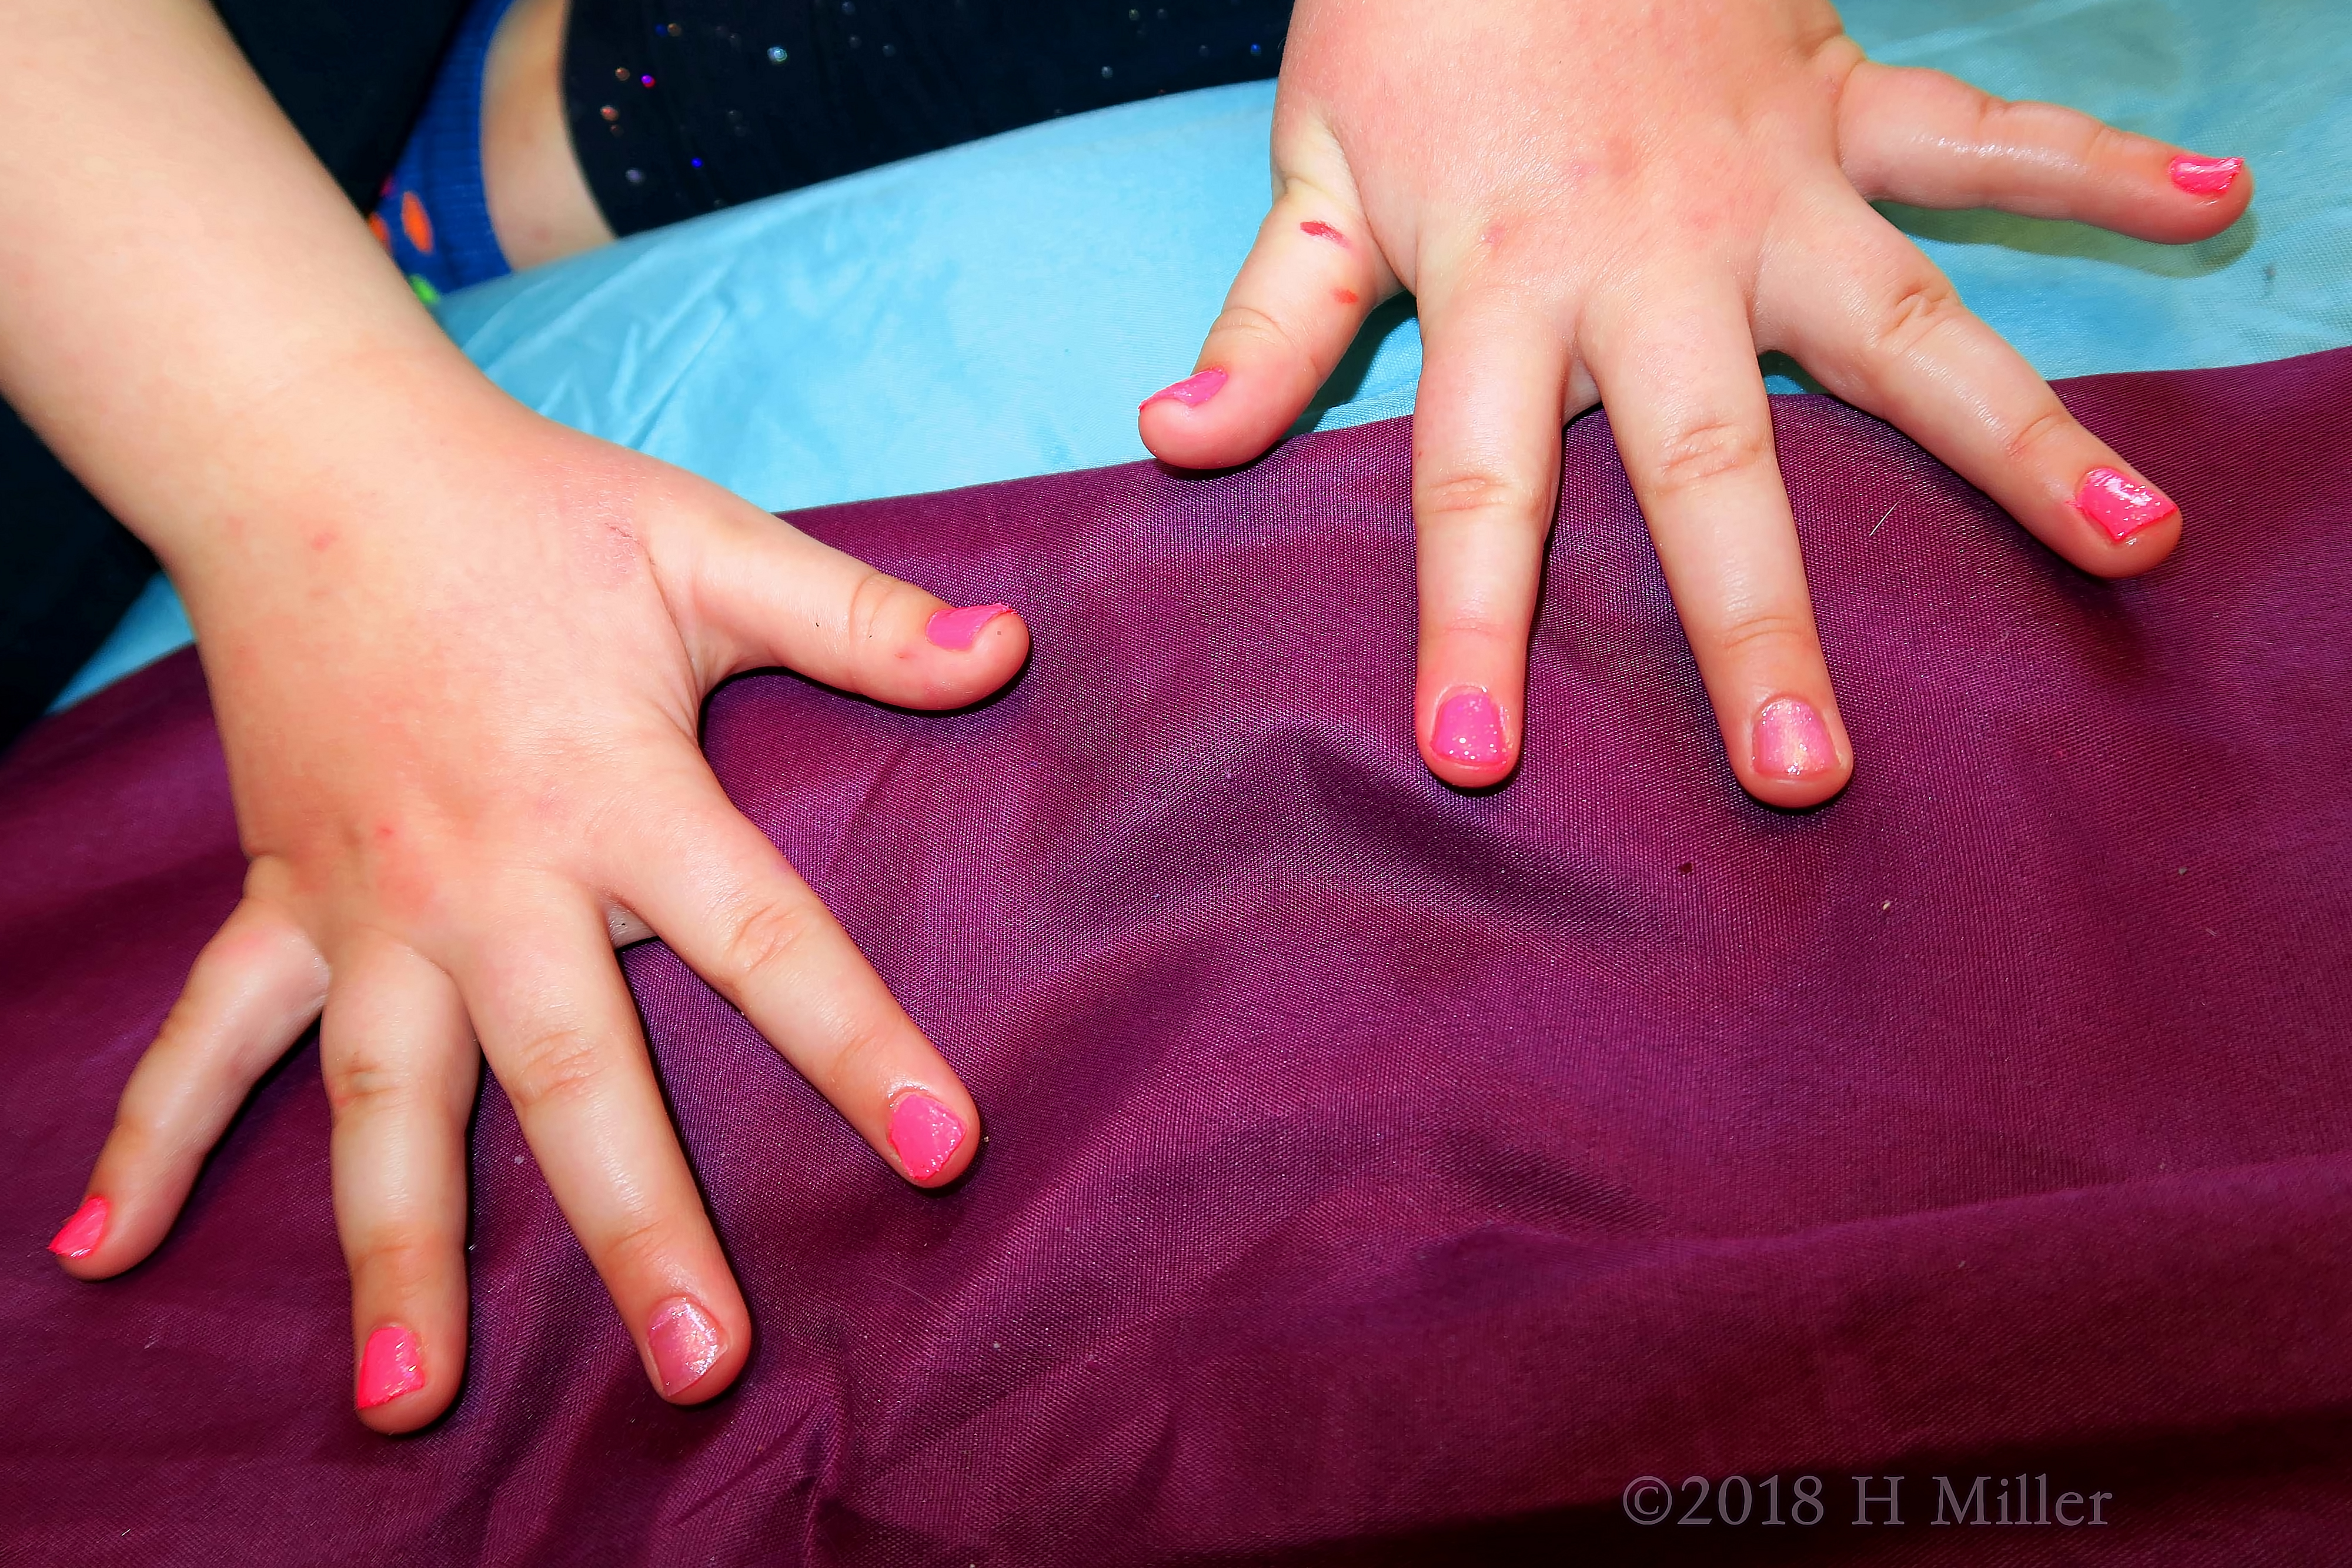 Kids Manicure! Hot Pink Glossy Polish With Different Shades Of Pink! 